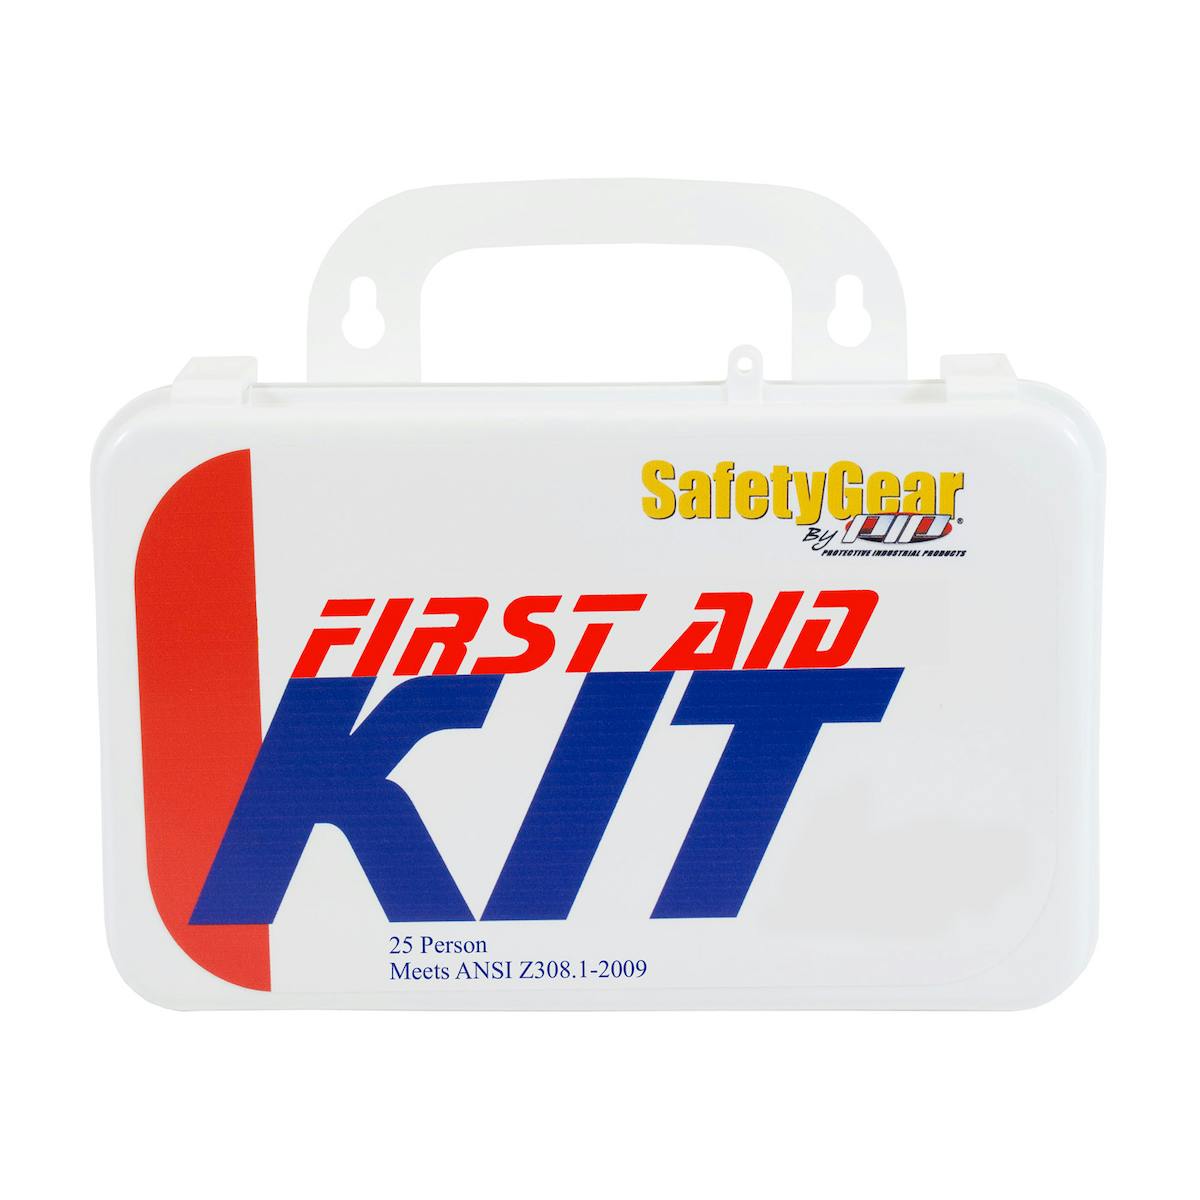 Personal First Aid Kit - 25 Person, White (299-13225) - KIT